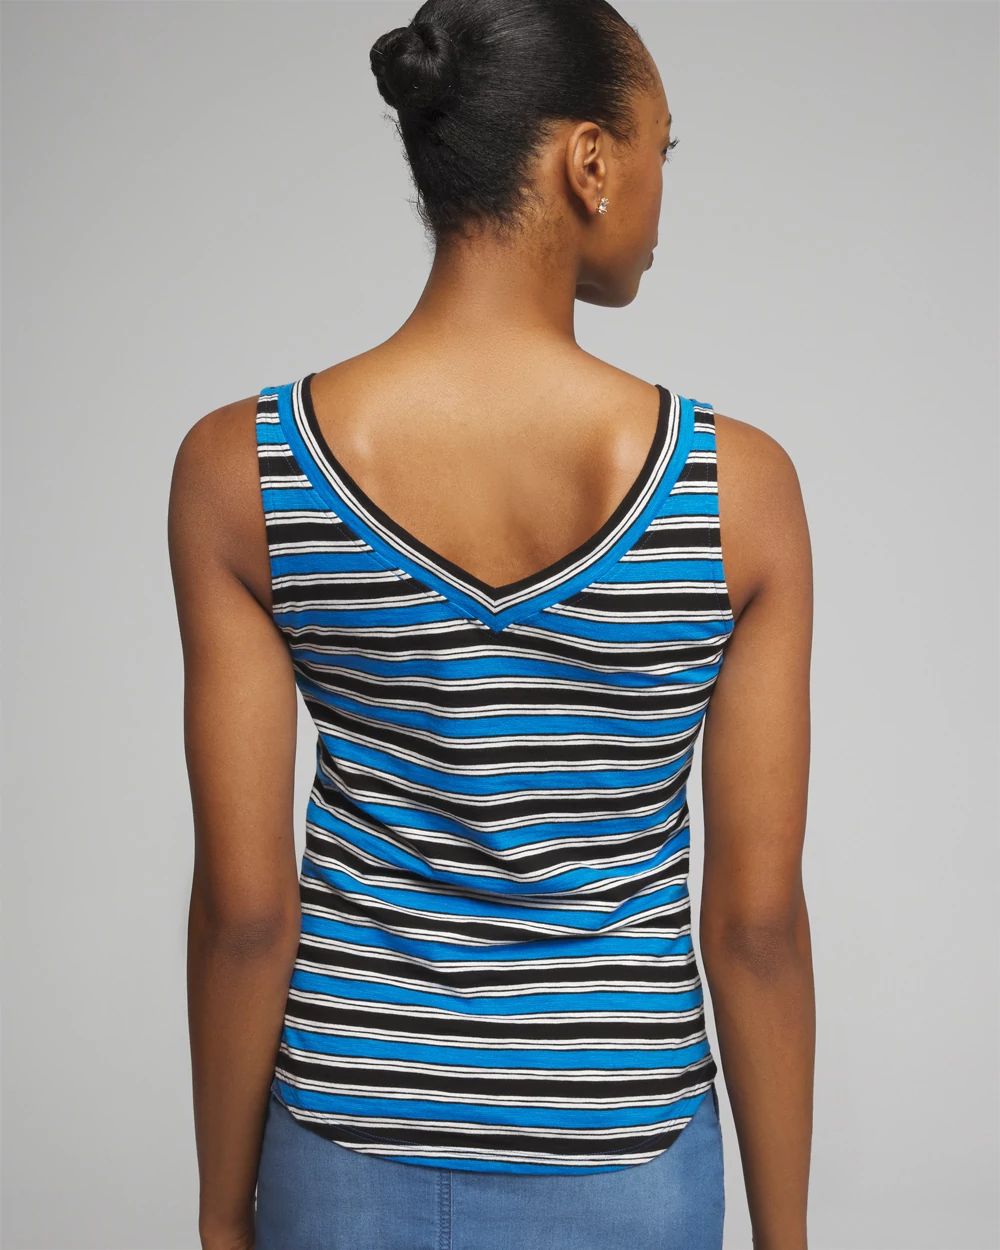 Outlet WHBM Double V-Neck Tank click to view larger image.